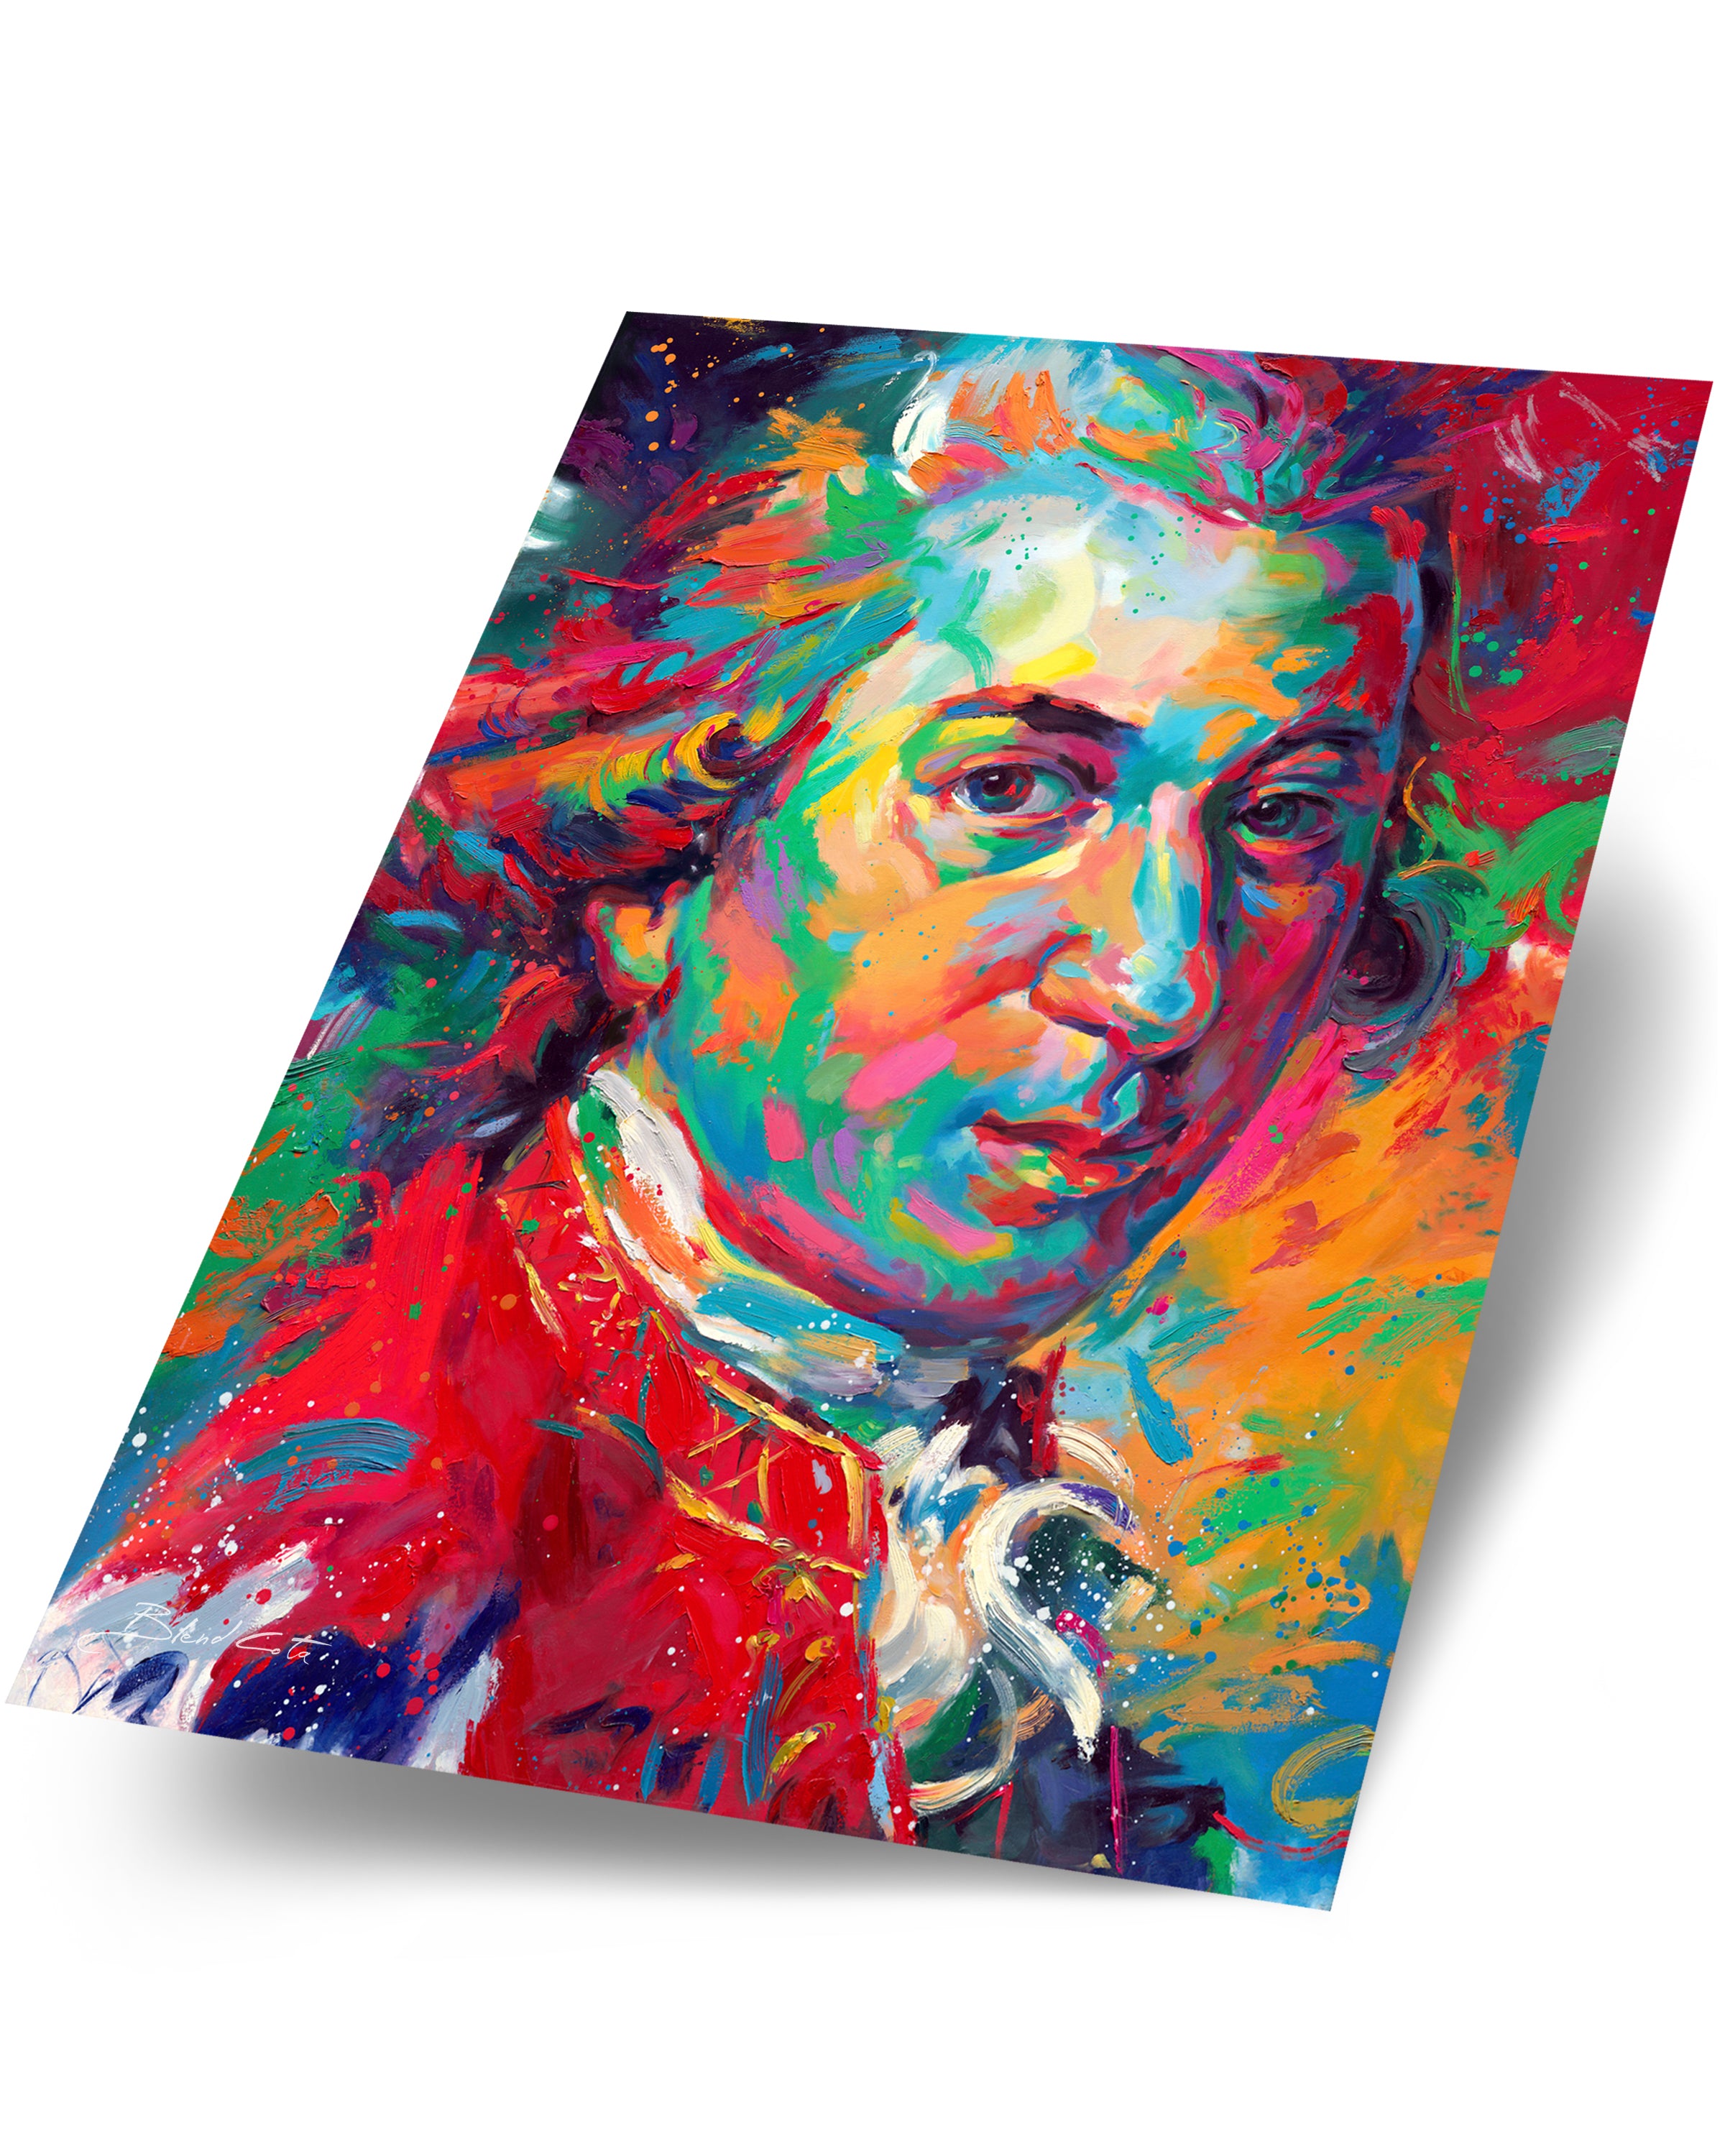 A portrait painted of the composer Wolfgang Amadeus Mozart, with colorful brushstrokes representing his mastery of music.